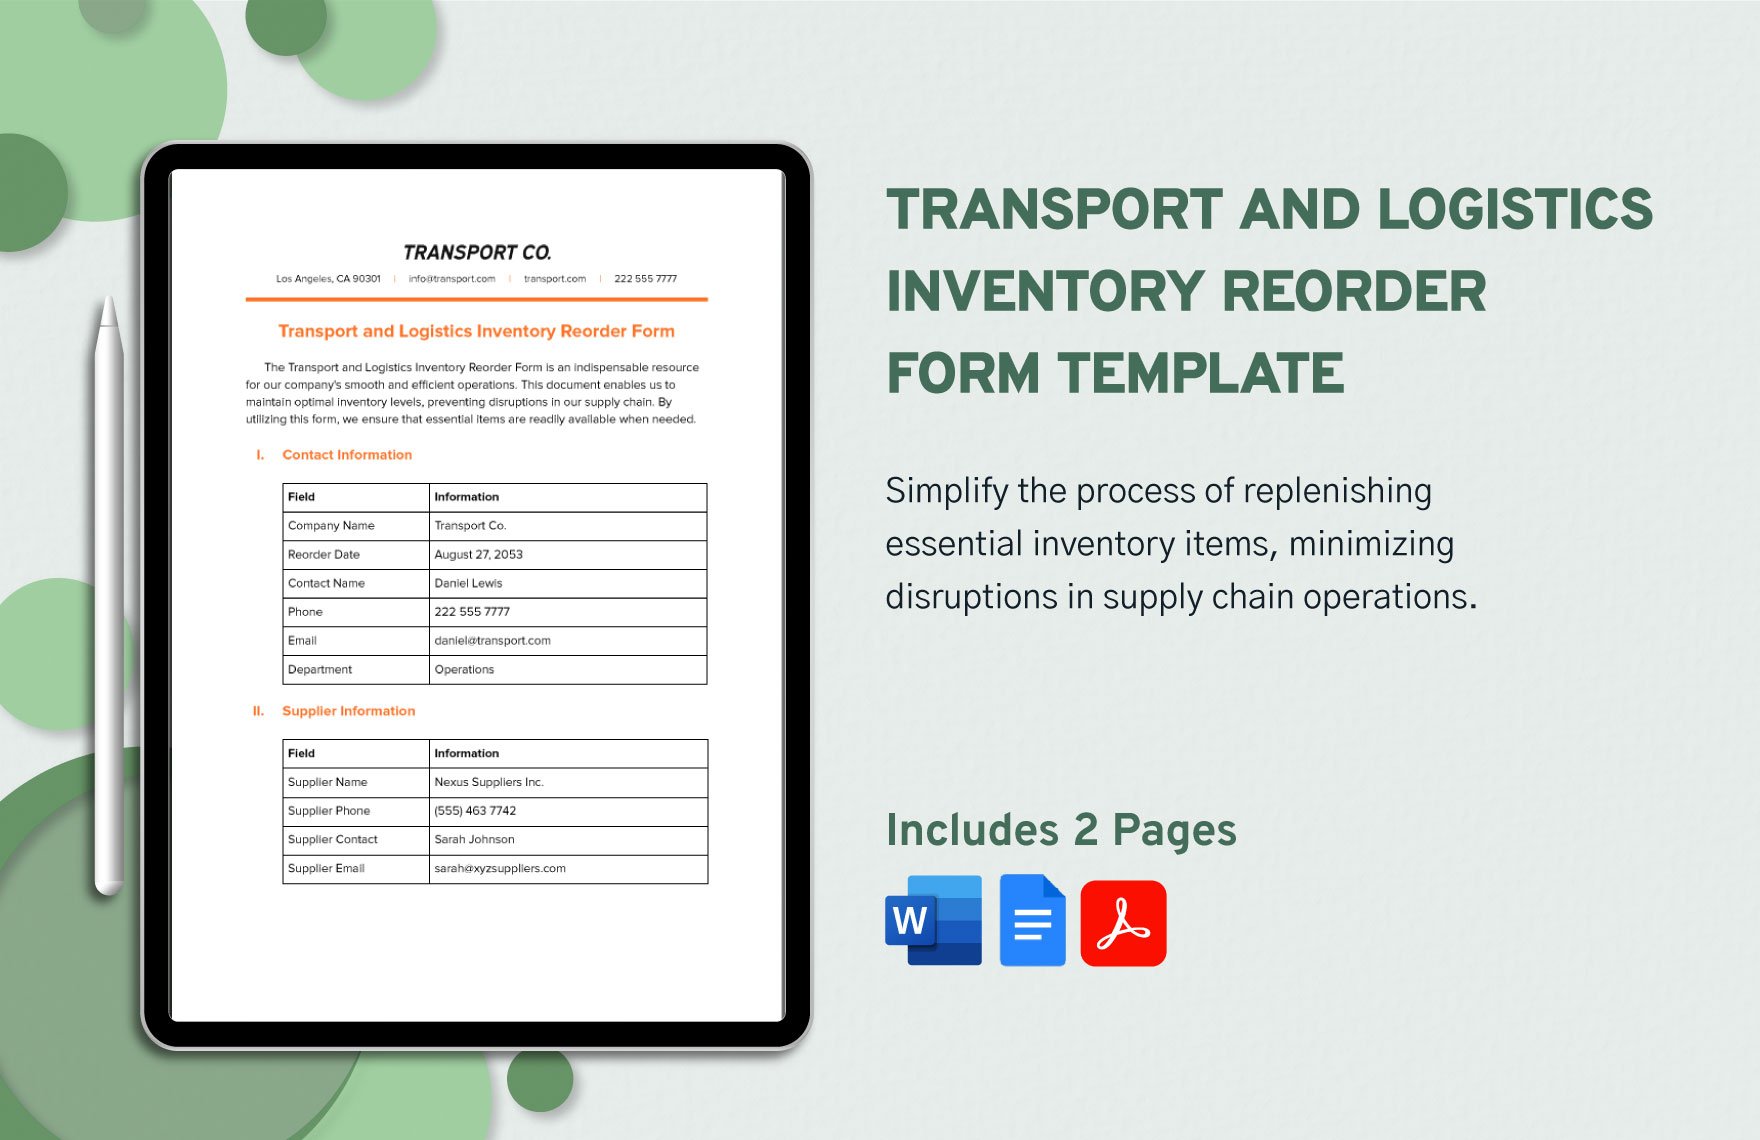 Transport and Logistics Inventory Reorder Form Template